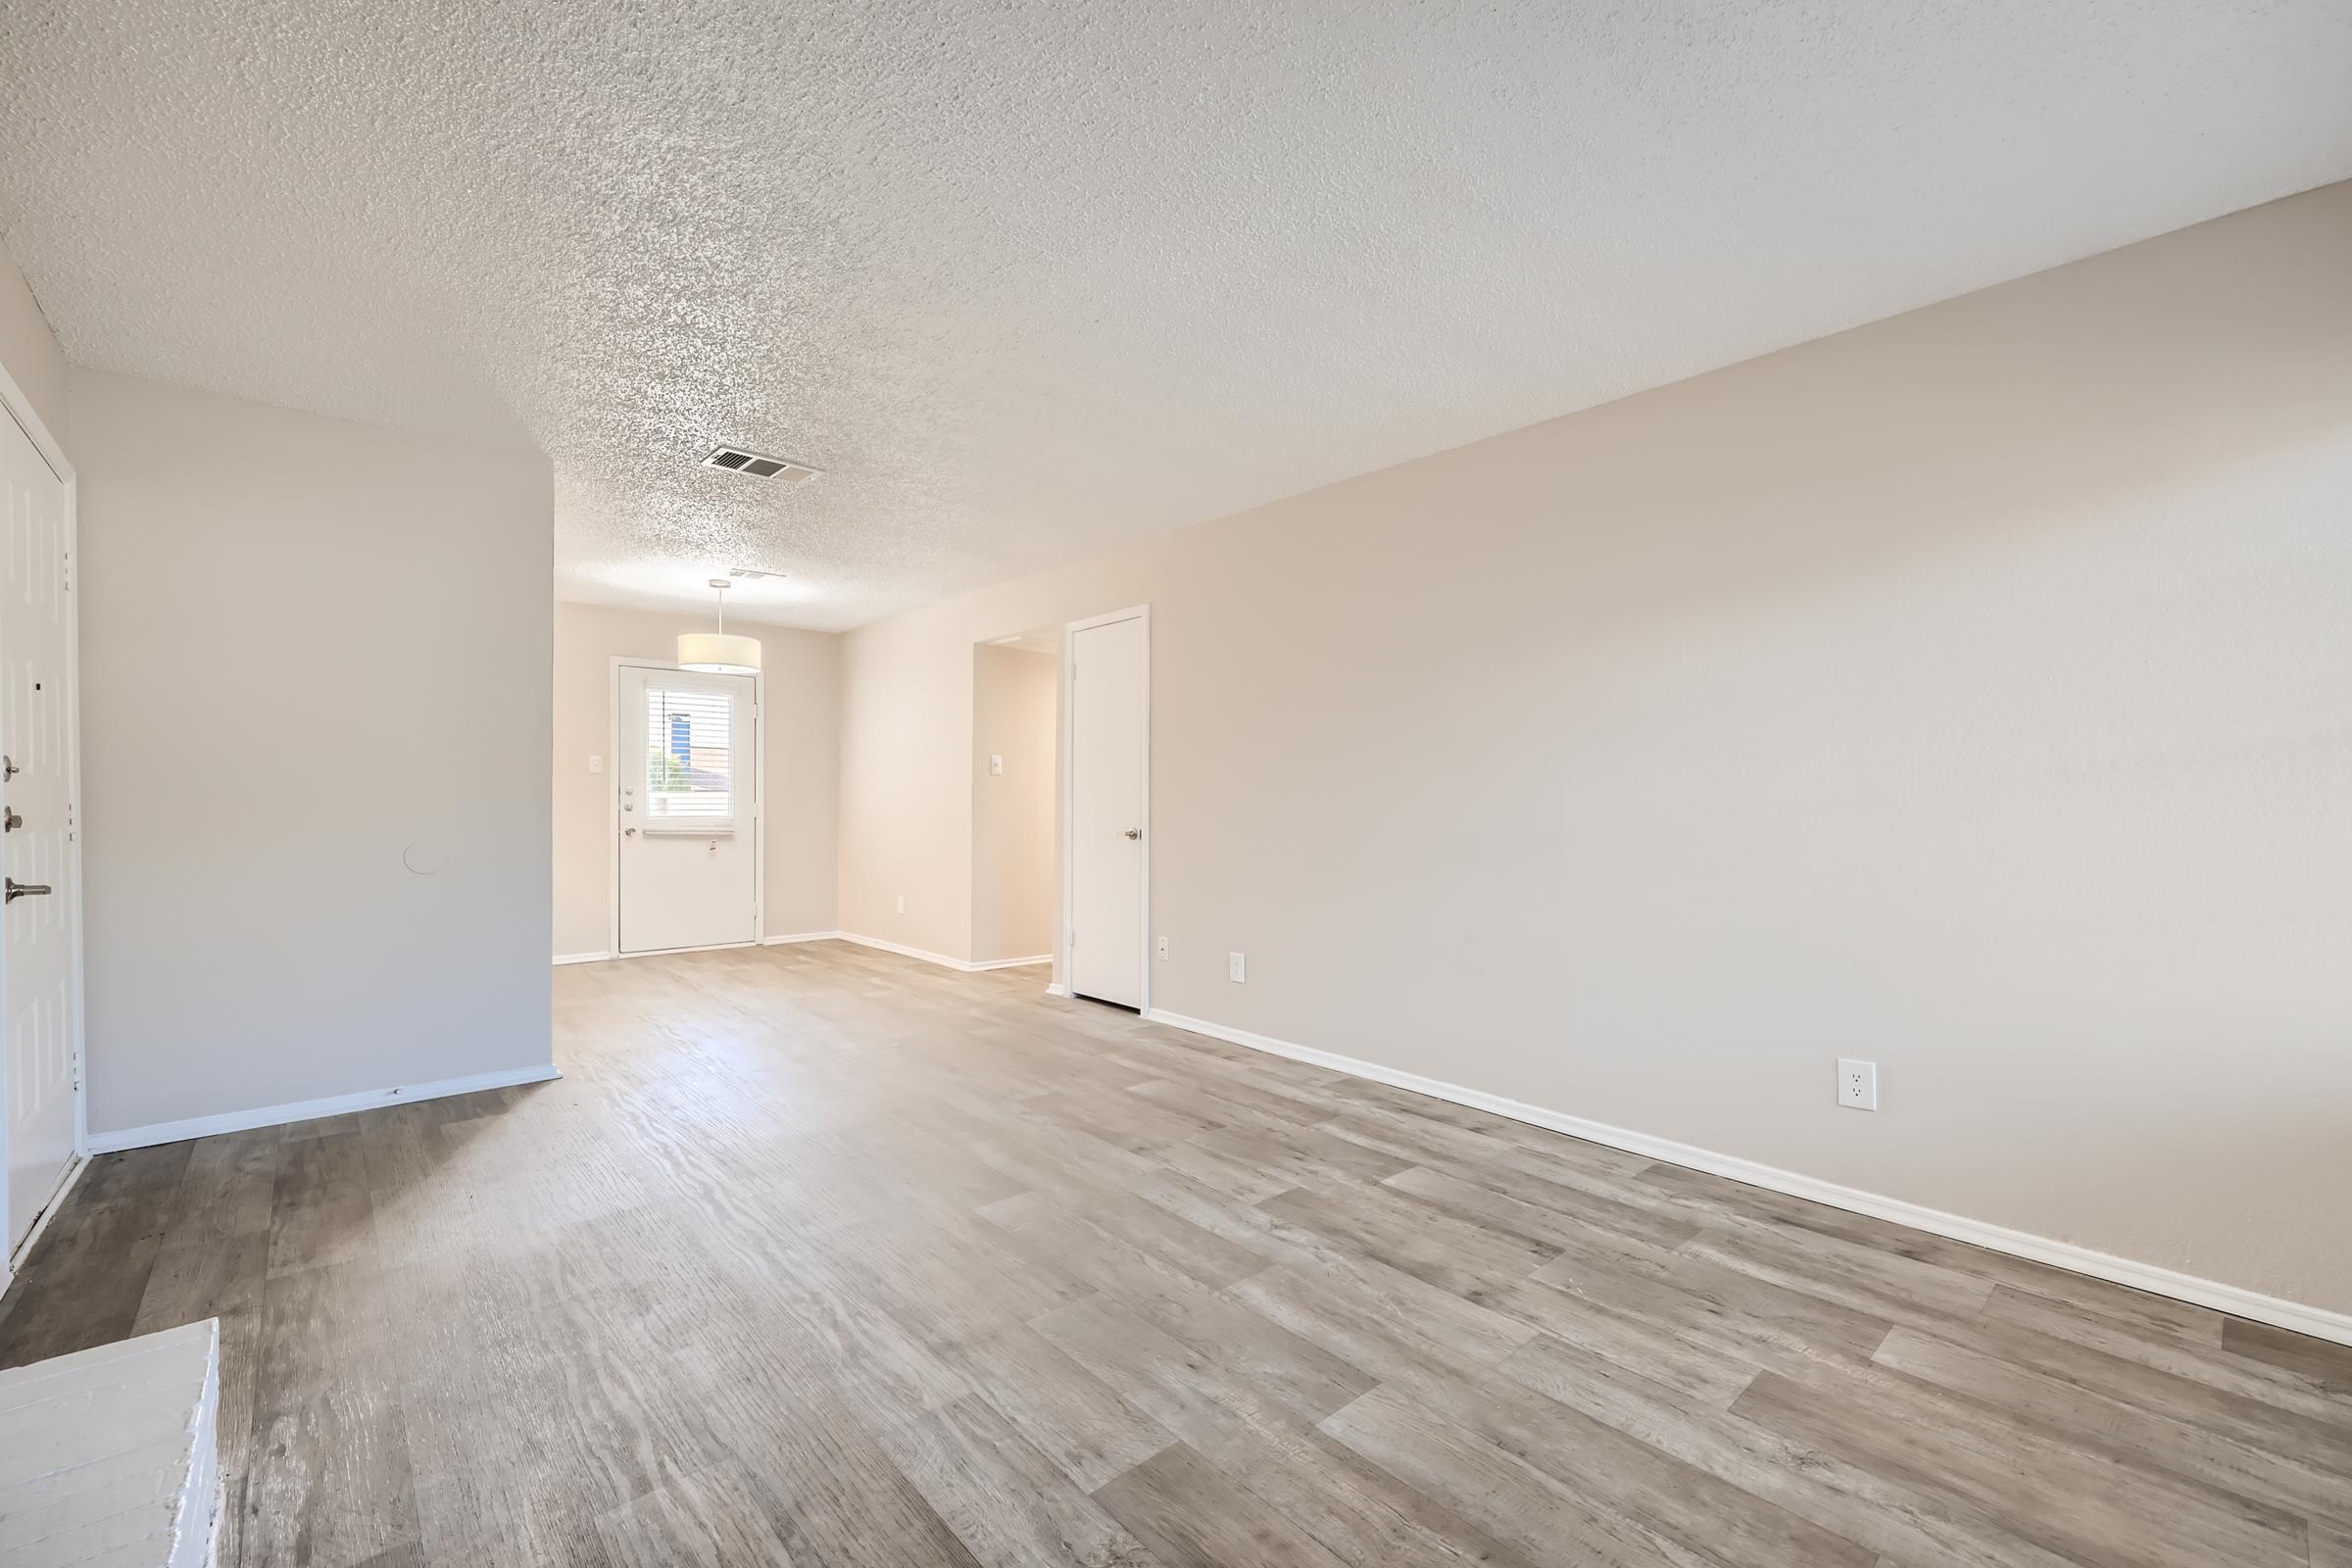 Wood-style flooring leading to the back entrance of an apartment at Rise Oak Creek.